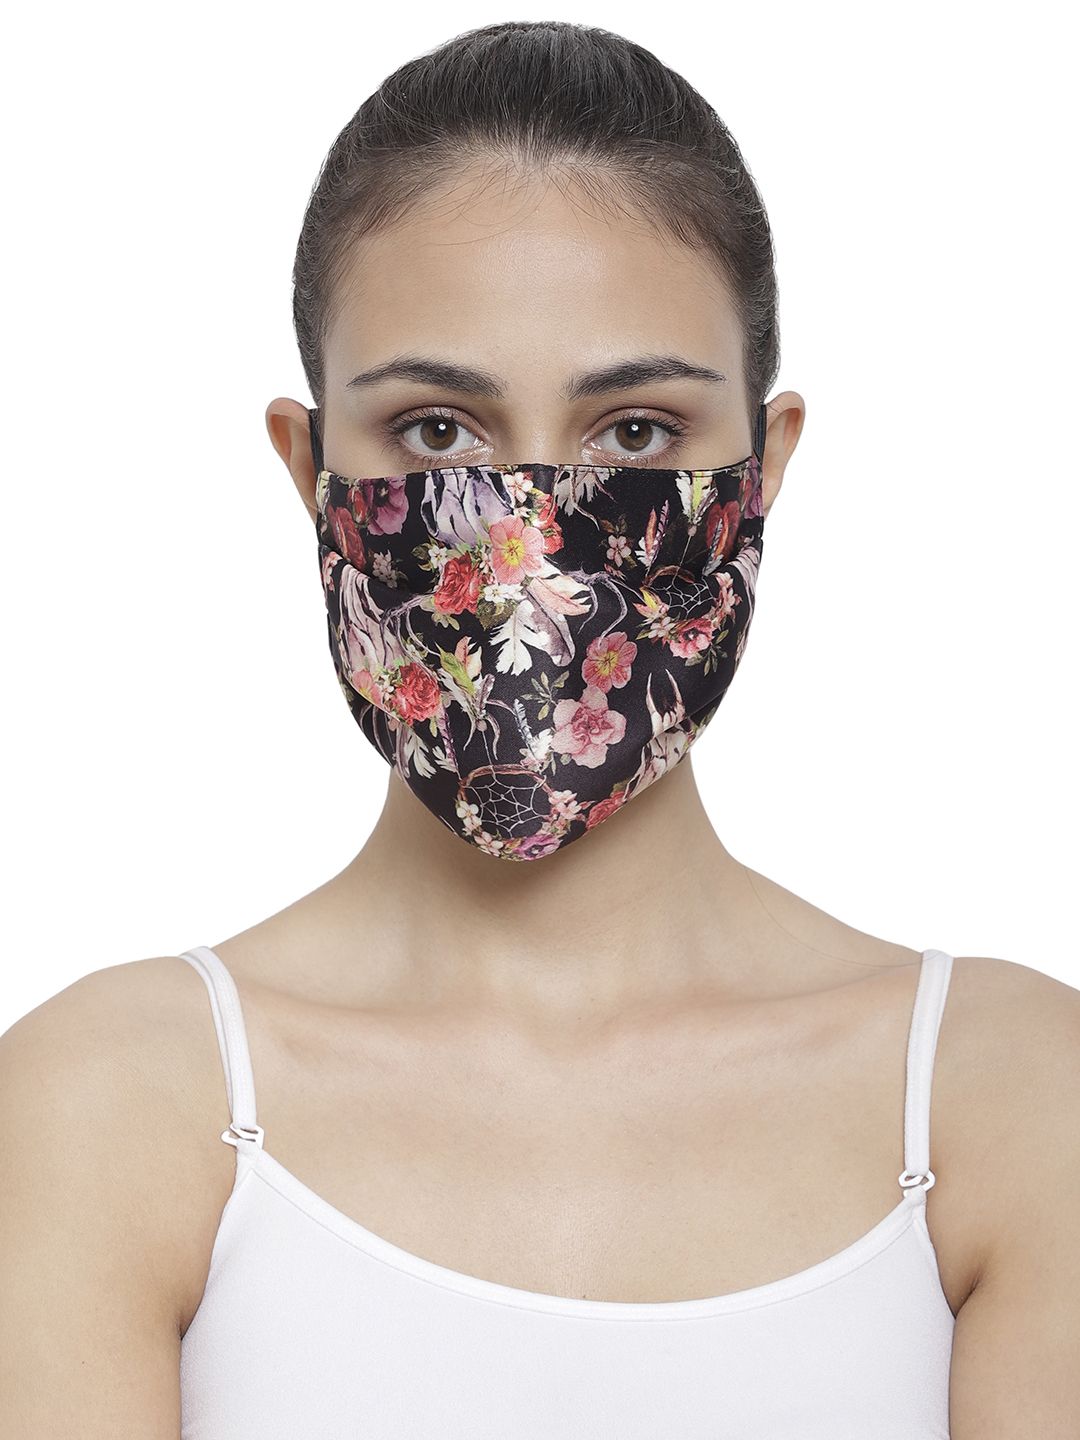 The House of Tara Unisex Printed 3-Ply Anti-Pollution Reusable Wrinkle-Free Cloth Masks Price in India